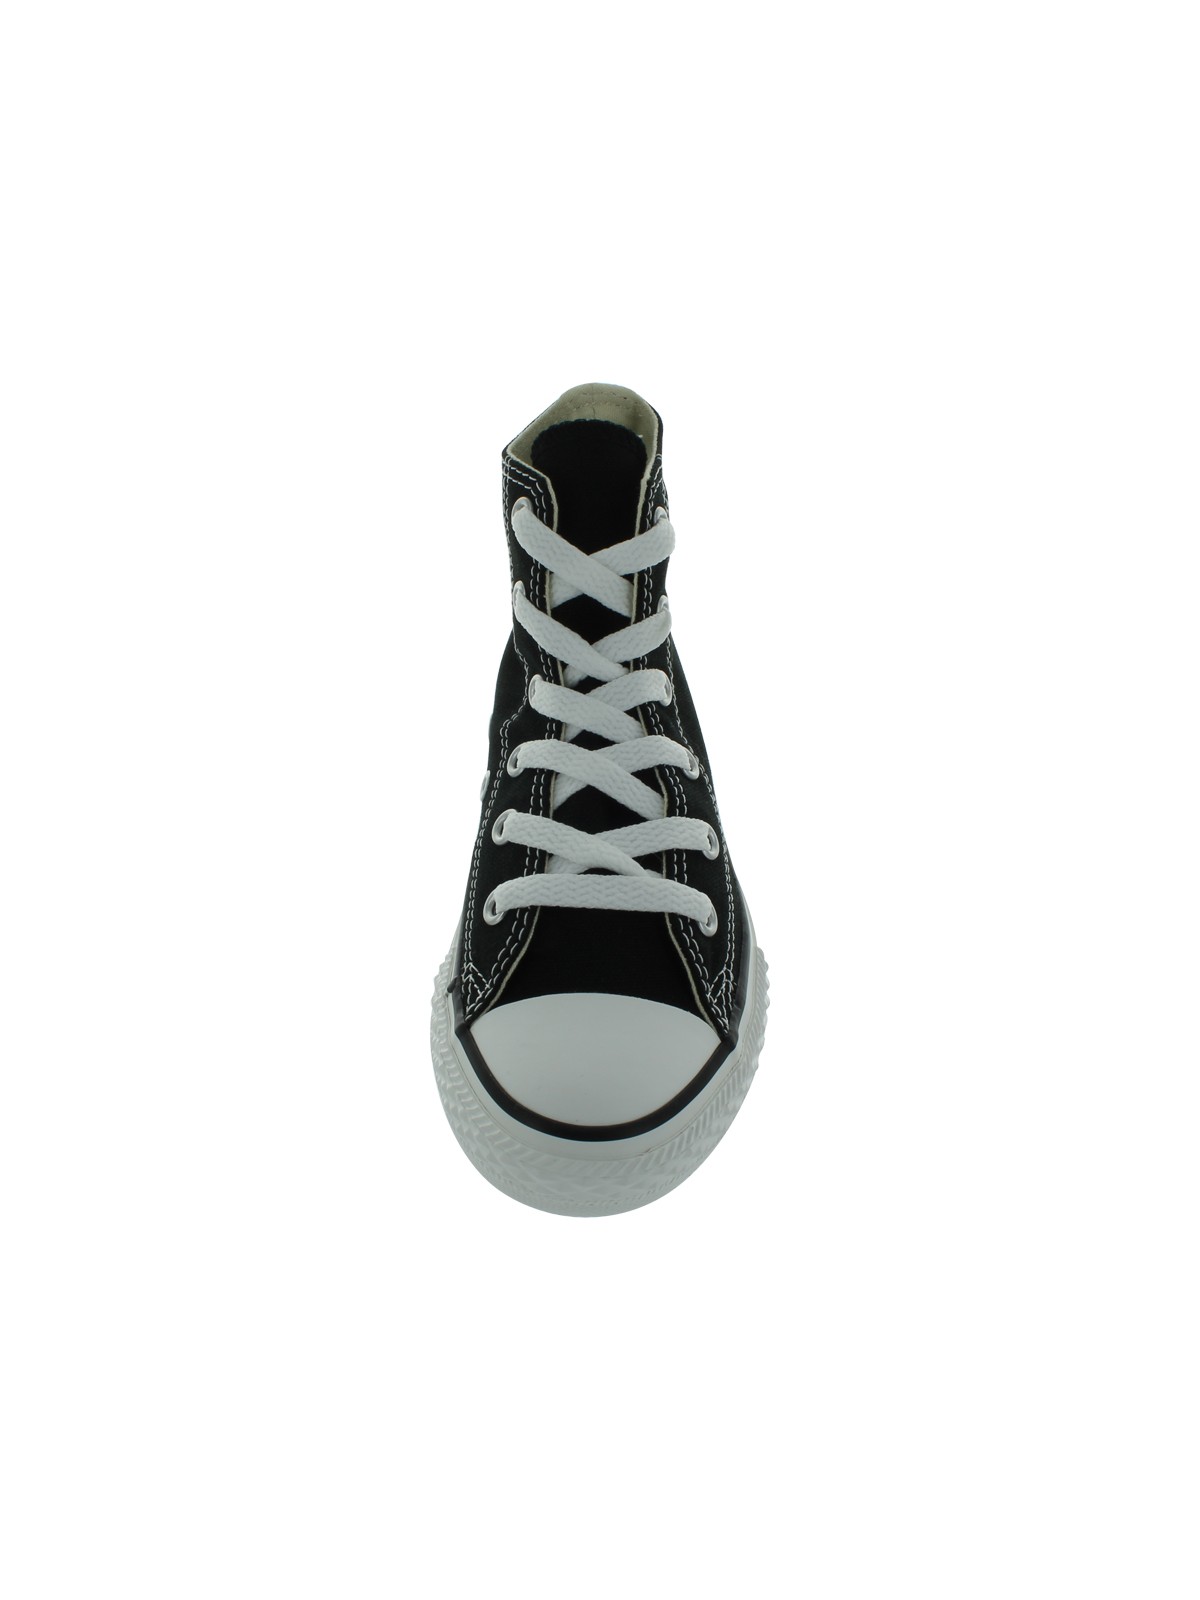 Converse Kid's Chuck Taylor All Star High Top Shoe - image 3 of 5